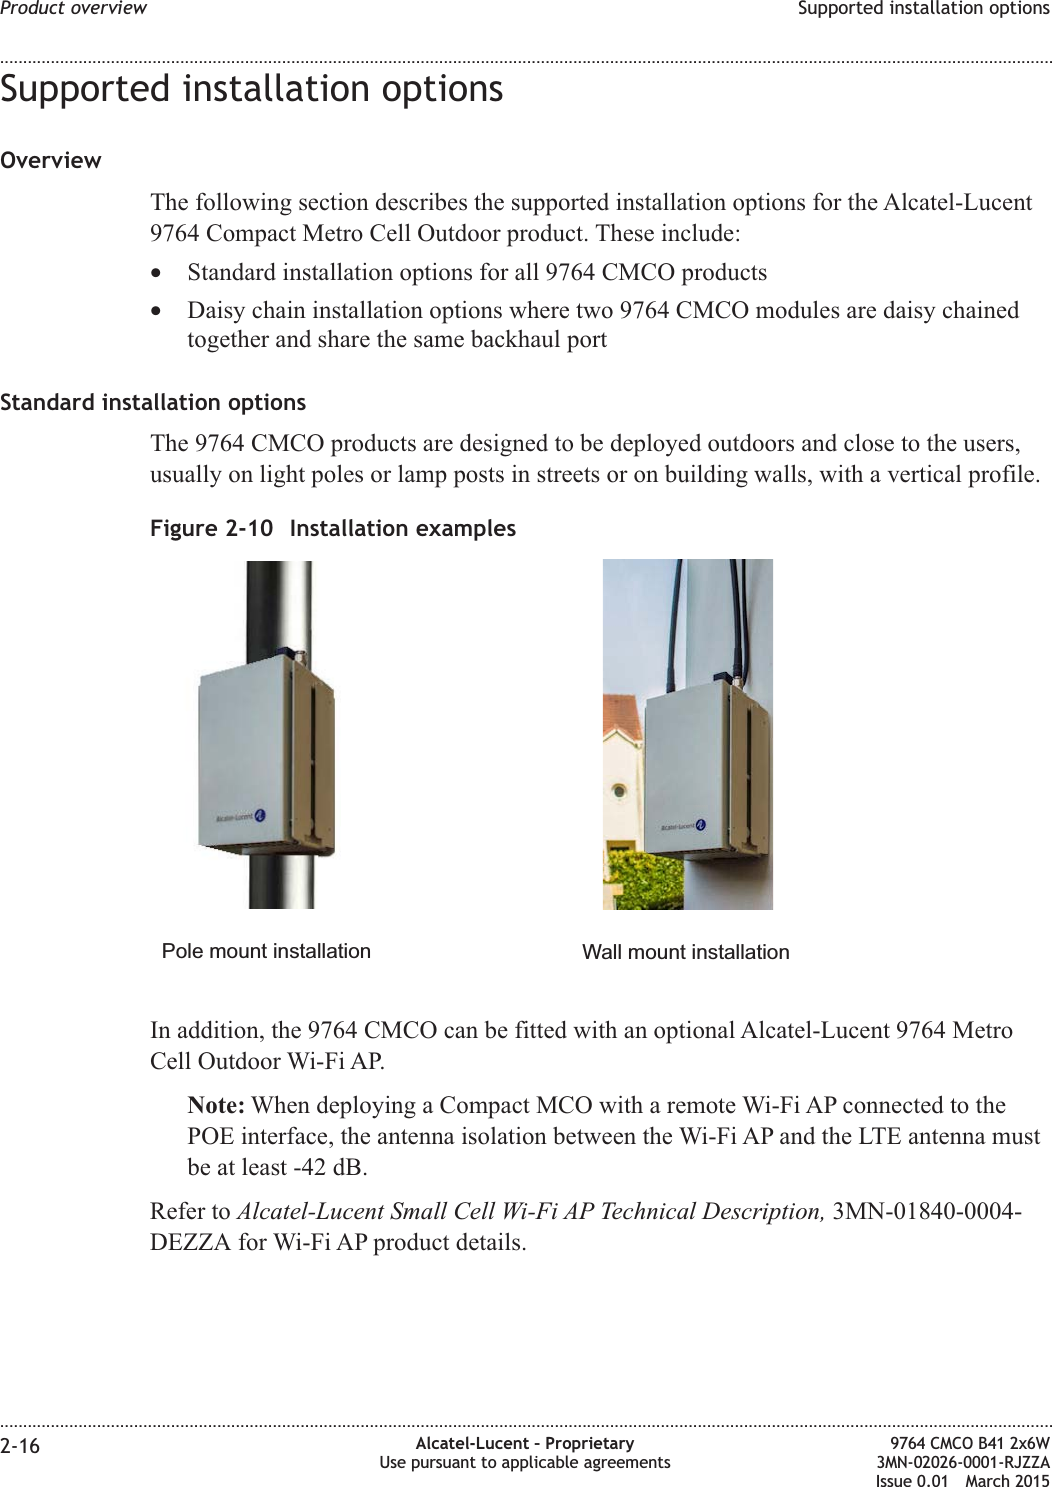 Supported installation optionsOverviewThe following section describes the supported installation options for the Alcatel-Lucent9764 Compact Metro Cell Outdoor product. These include:•Standard installation options for all 9764 CMCO products•Daisy chain installation options where two 9764 CMCO modules are daisy chainedtogether and share the same backhaul portStandard installation optionsThe 9764 CMCO products are designed to be deployed outdoors and close to the users,usually on light poles or lamp posts in streets or on building walls, with a vertical profile.In addition, the 9764 CMCO can be fitted with an optional Alcatel-Lucent 9764 MetroCell Outdoor Wi-Fi AP.Note: When deploying a Compact MCO with a remote Wi-Fi AP connected to thePOE interface, the antenna isolation between the Wi-Fi AP and the LTE antenna mustbe at least -42 dB.Refer to Alcatel-Lucent Small Cell Wi-Fi AP Technical Description, 3MN-01840-0004-DEZZA for Wi-Fi AP product details.Figure 2-10 Installation examplesPole mount installation Wall mount installationProduct overview Supported installation options........................................................................................................................................................................................................................................................................................................................................................................................................................................................................2-16 Alcatel-Lucent – ProprietaryUse pursuant to applicable agreements9764 CMCO B41 2x6W3MN-02026-0001-RJZZAIssue 0.01 March 2015DRAFTDRAFT